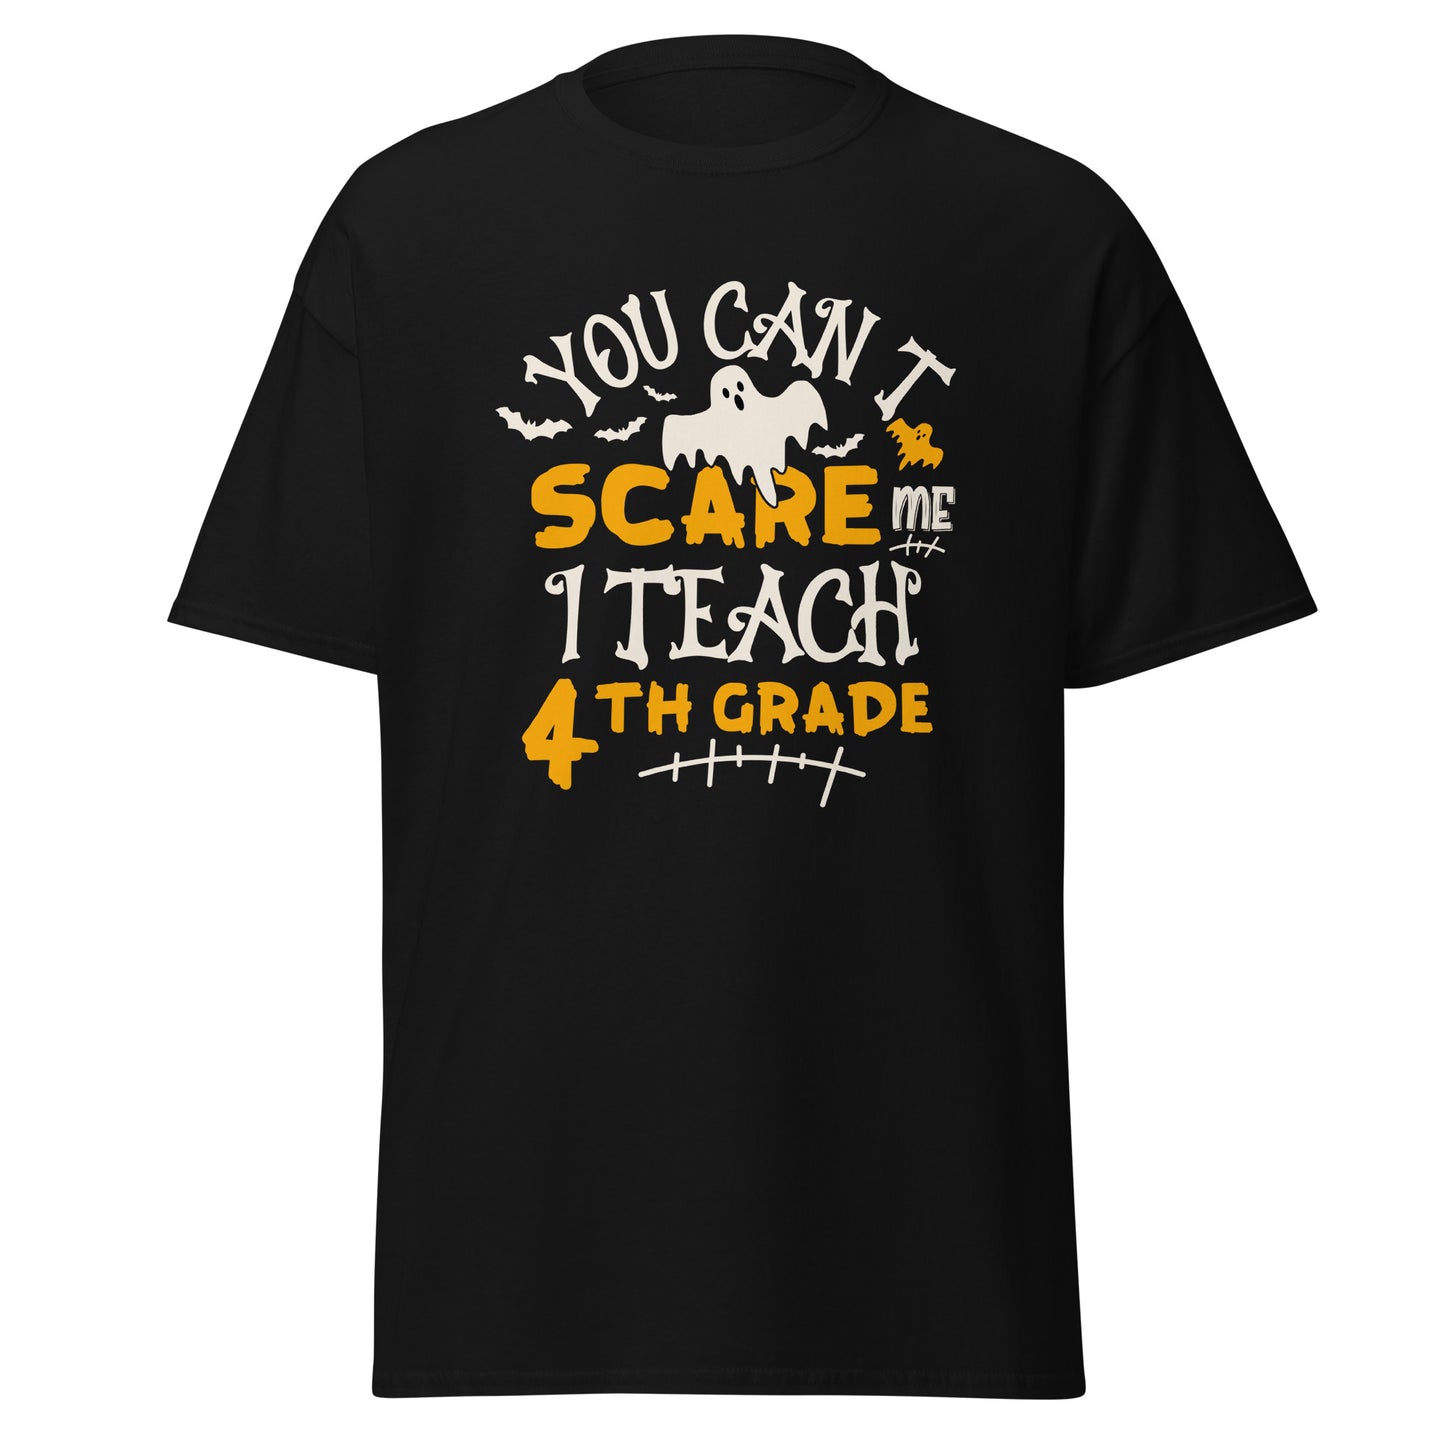 you can't scare me I teach 4th grade , Halloween Design Soft Style Heavy Cotton T-Shirt